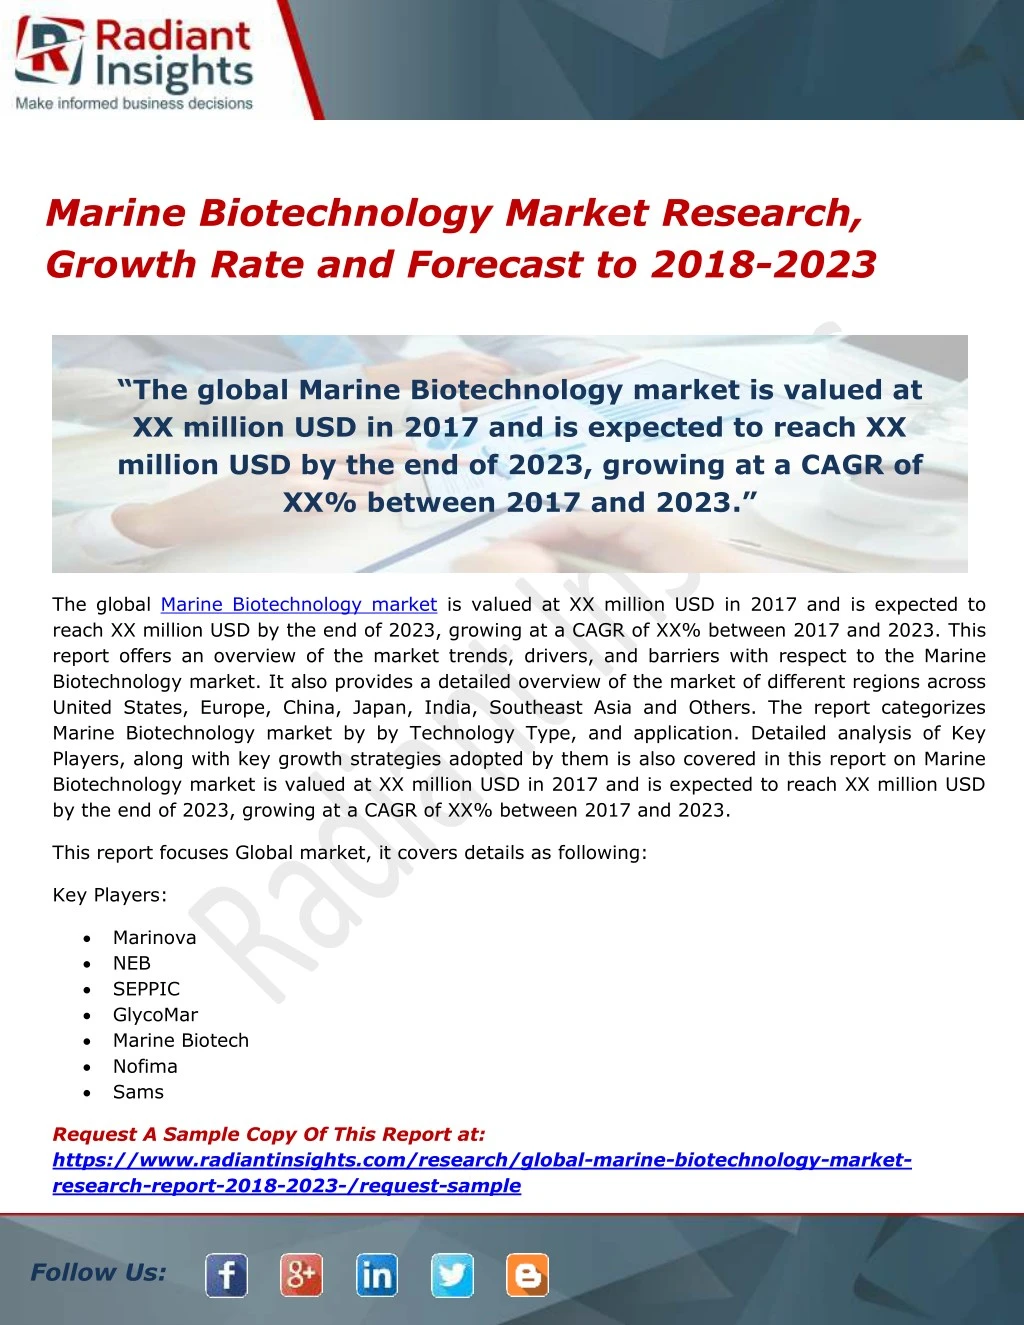 marine biotechnology market research growth rate